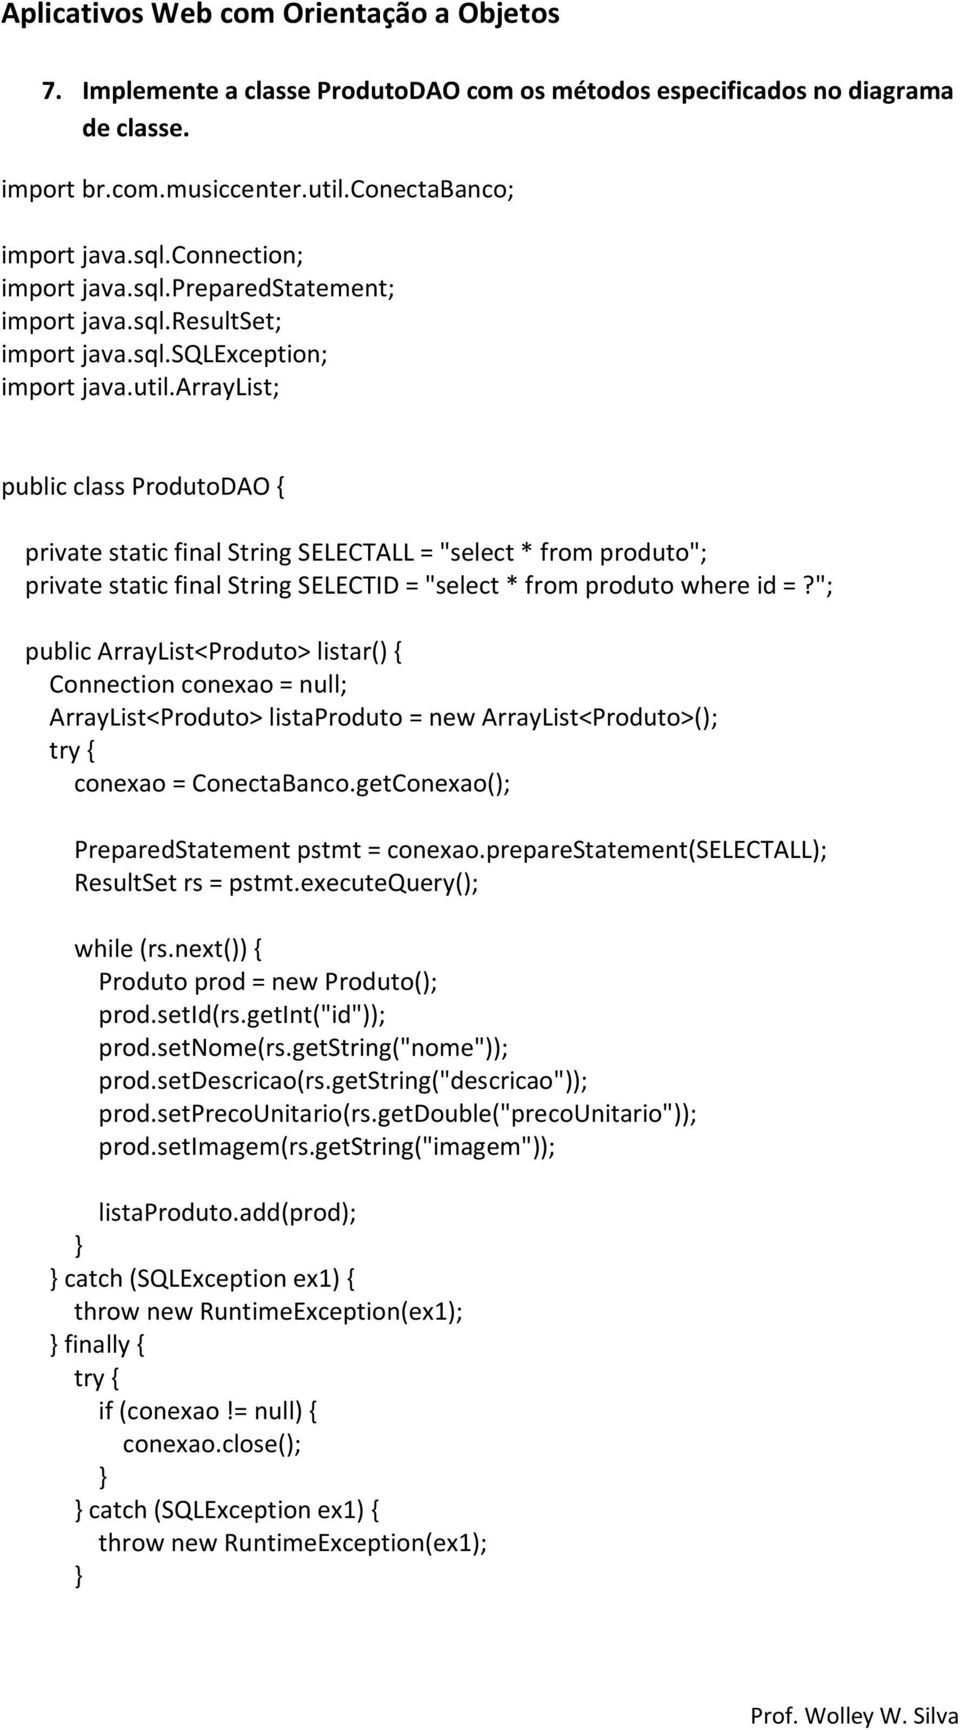 arraylist; public class ProdutoDAO { private static final String SELECTALL = "select * from produto"; private static final String SELECTID = "select * from produto where id =?